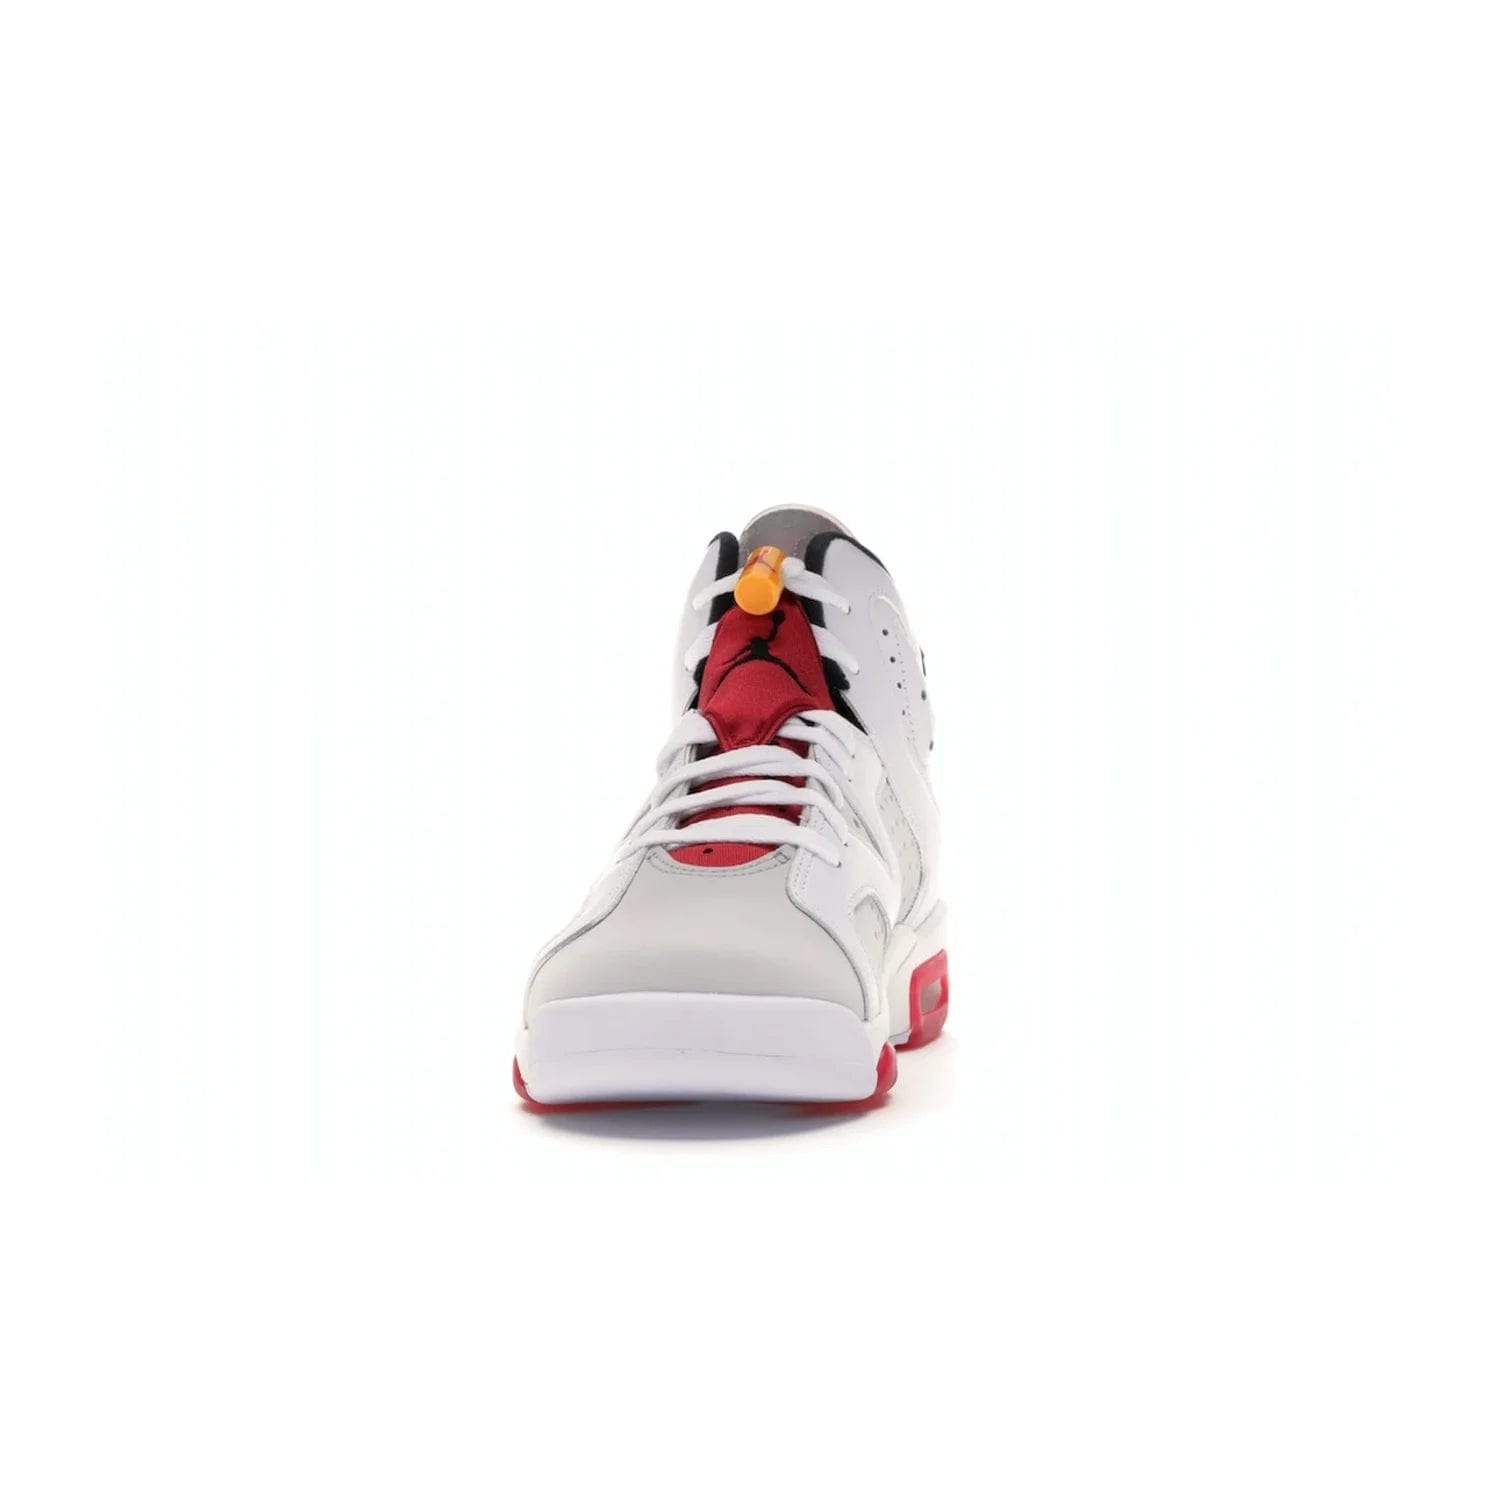 Jordan 6 Retro Hare (GS) - Image 11 - Only at www.BallersClubKickz.com - The Air Jordan 6 Hare GS. Comfortable suede upper, perforations, red pods, two-tone midsole, and signature "Jumpman" emblem. Released 17 June 2020. Perfect for any sneakerhead.